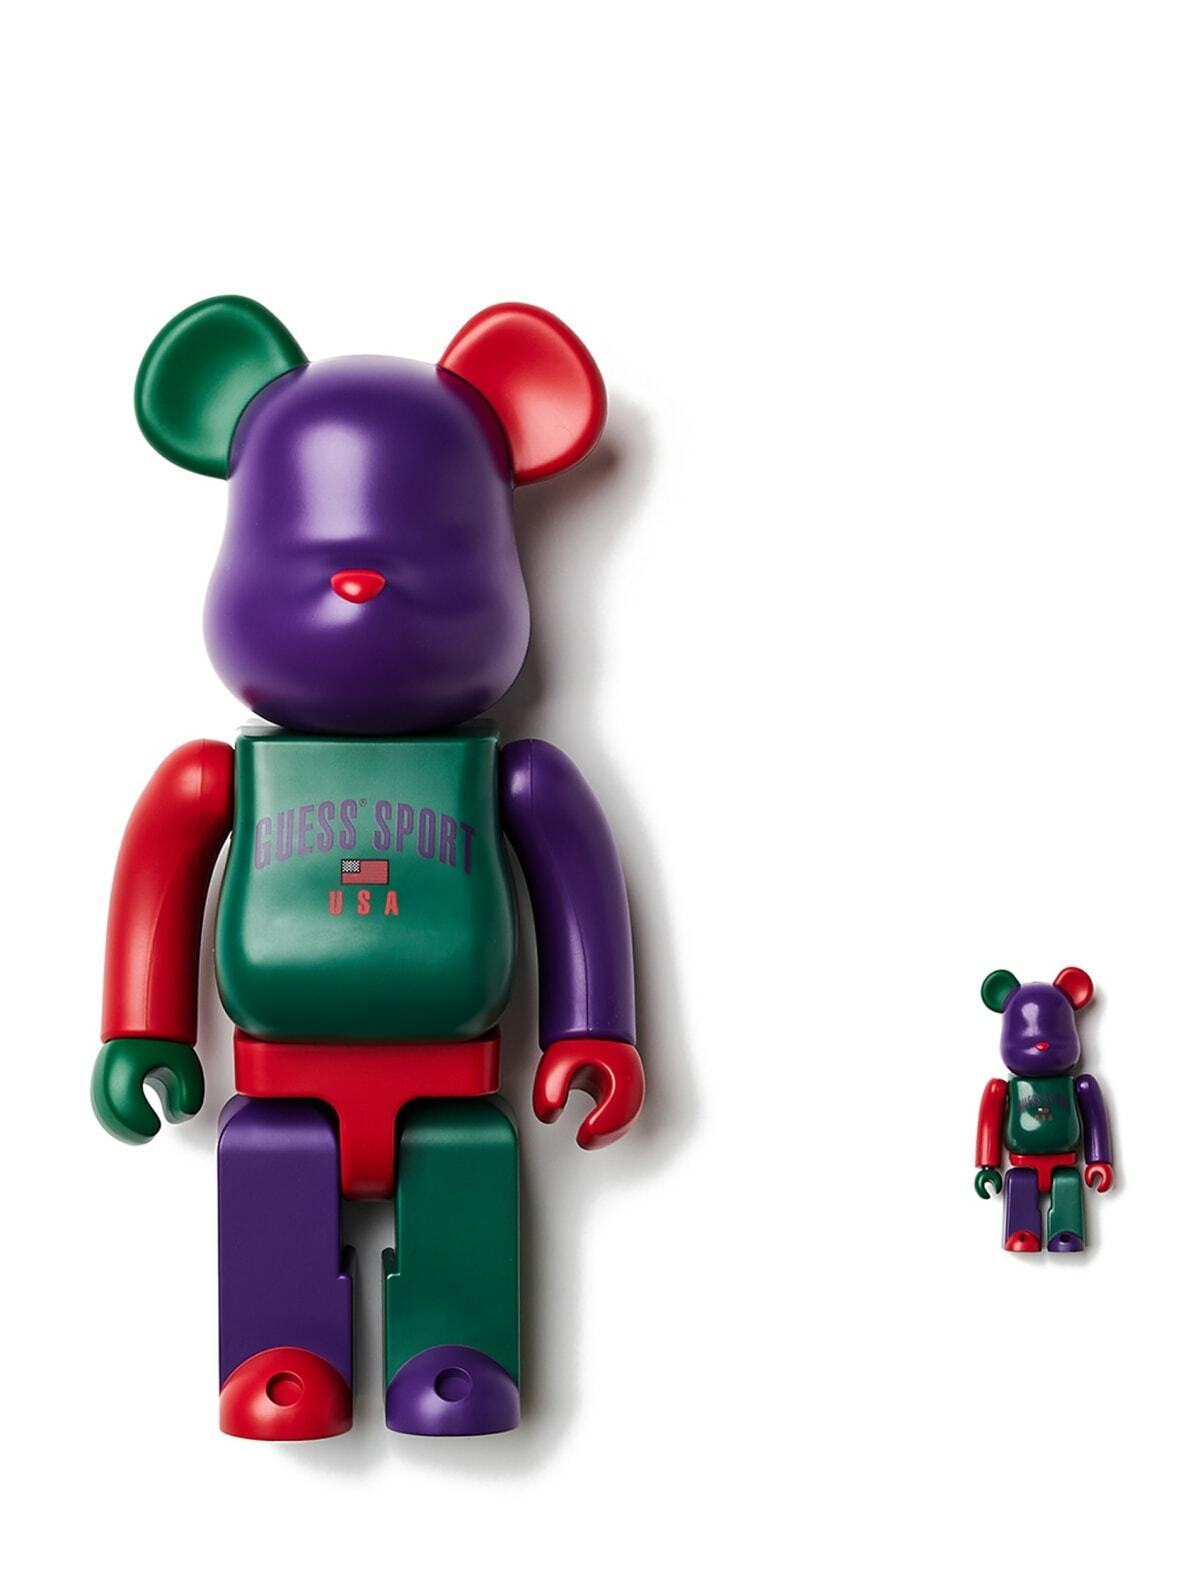 Guess Sport 400% 100% Bearbrick Medicom Toy Be@rbrick Rare Limited Multi Color